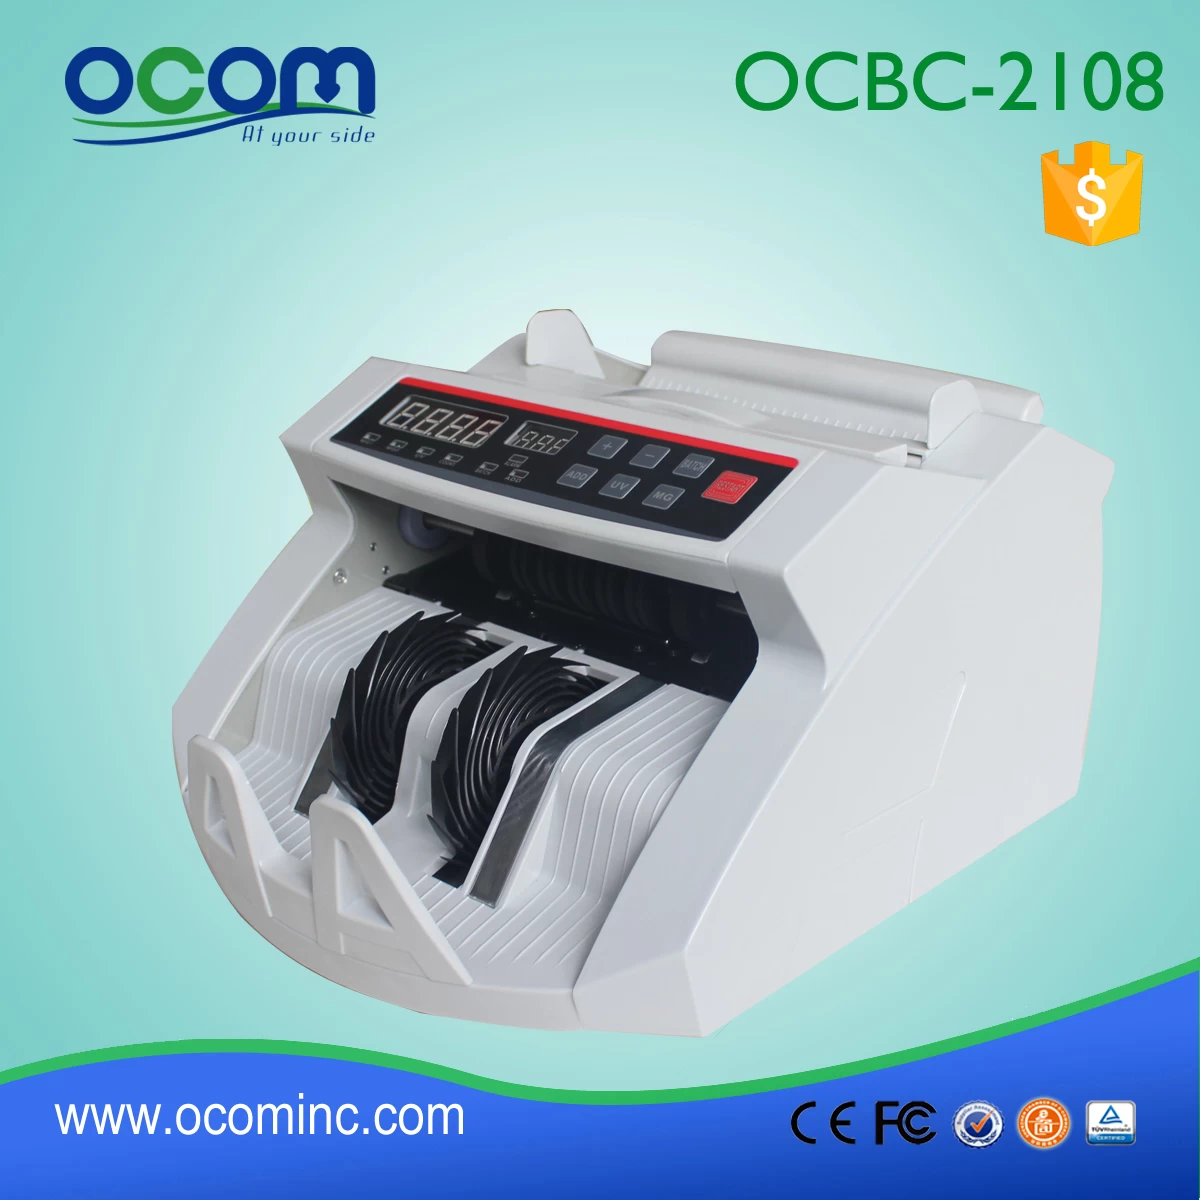 OCBC-2108:Banknote Bill Currency Counter with Fake Detector